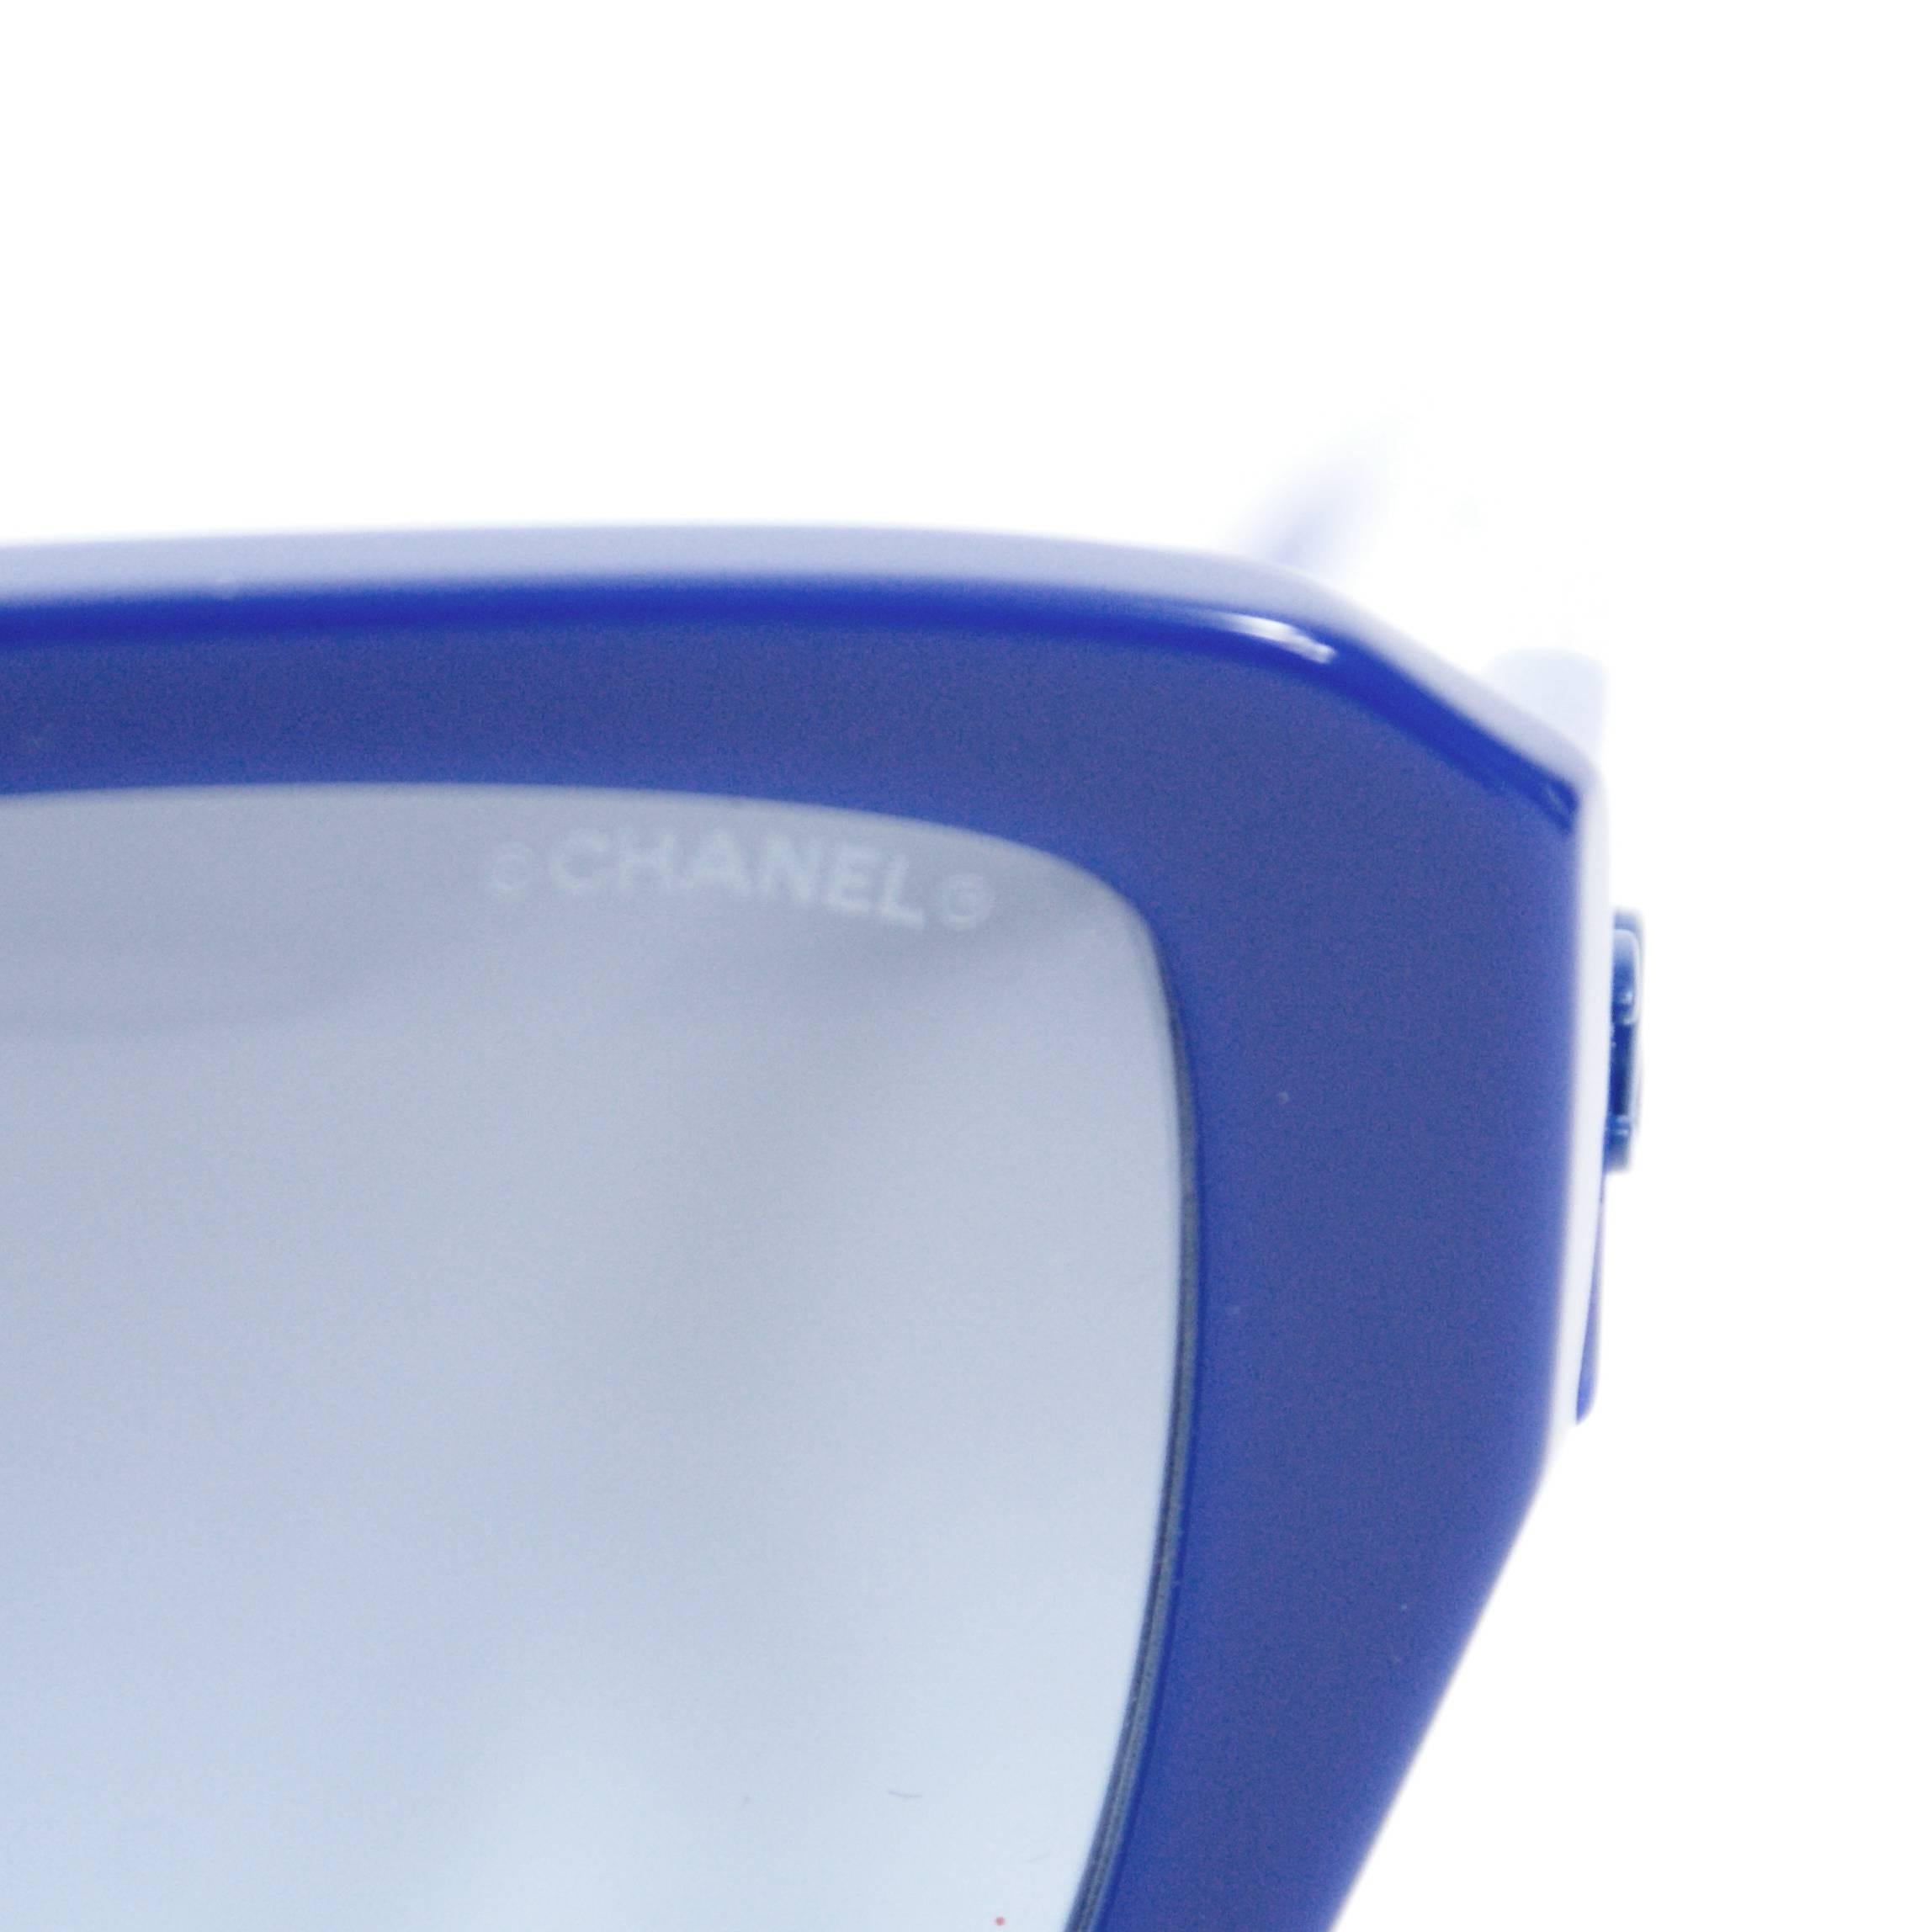 Chanel Royal Blue/Lucite Sunglasses In New Condition For Sale In Narberth, PA